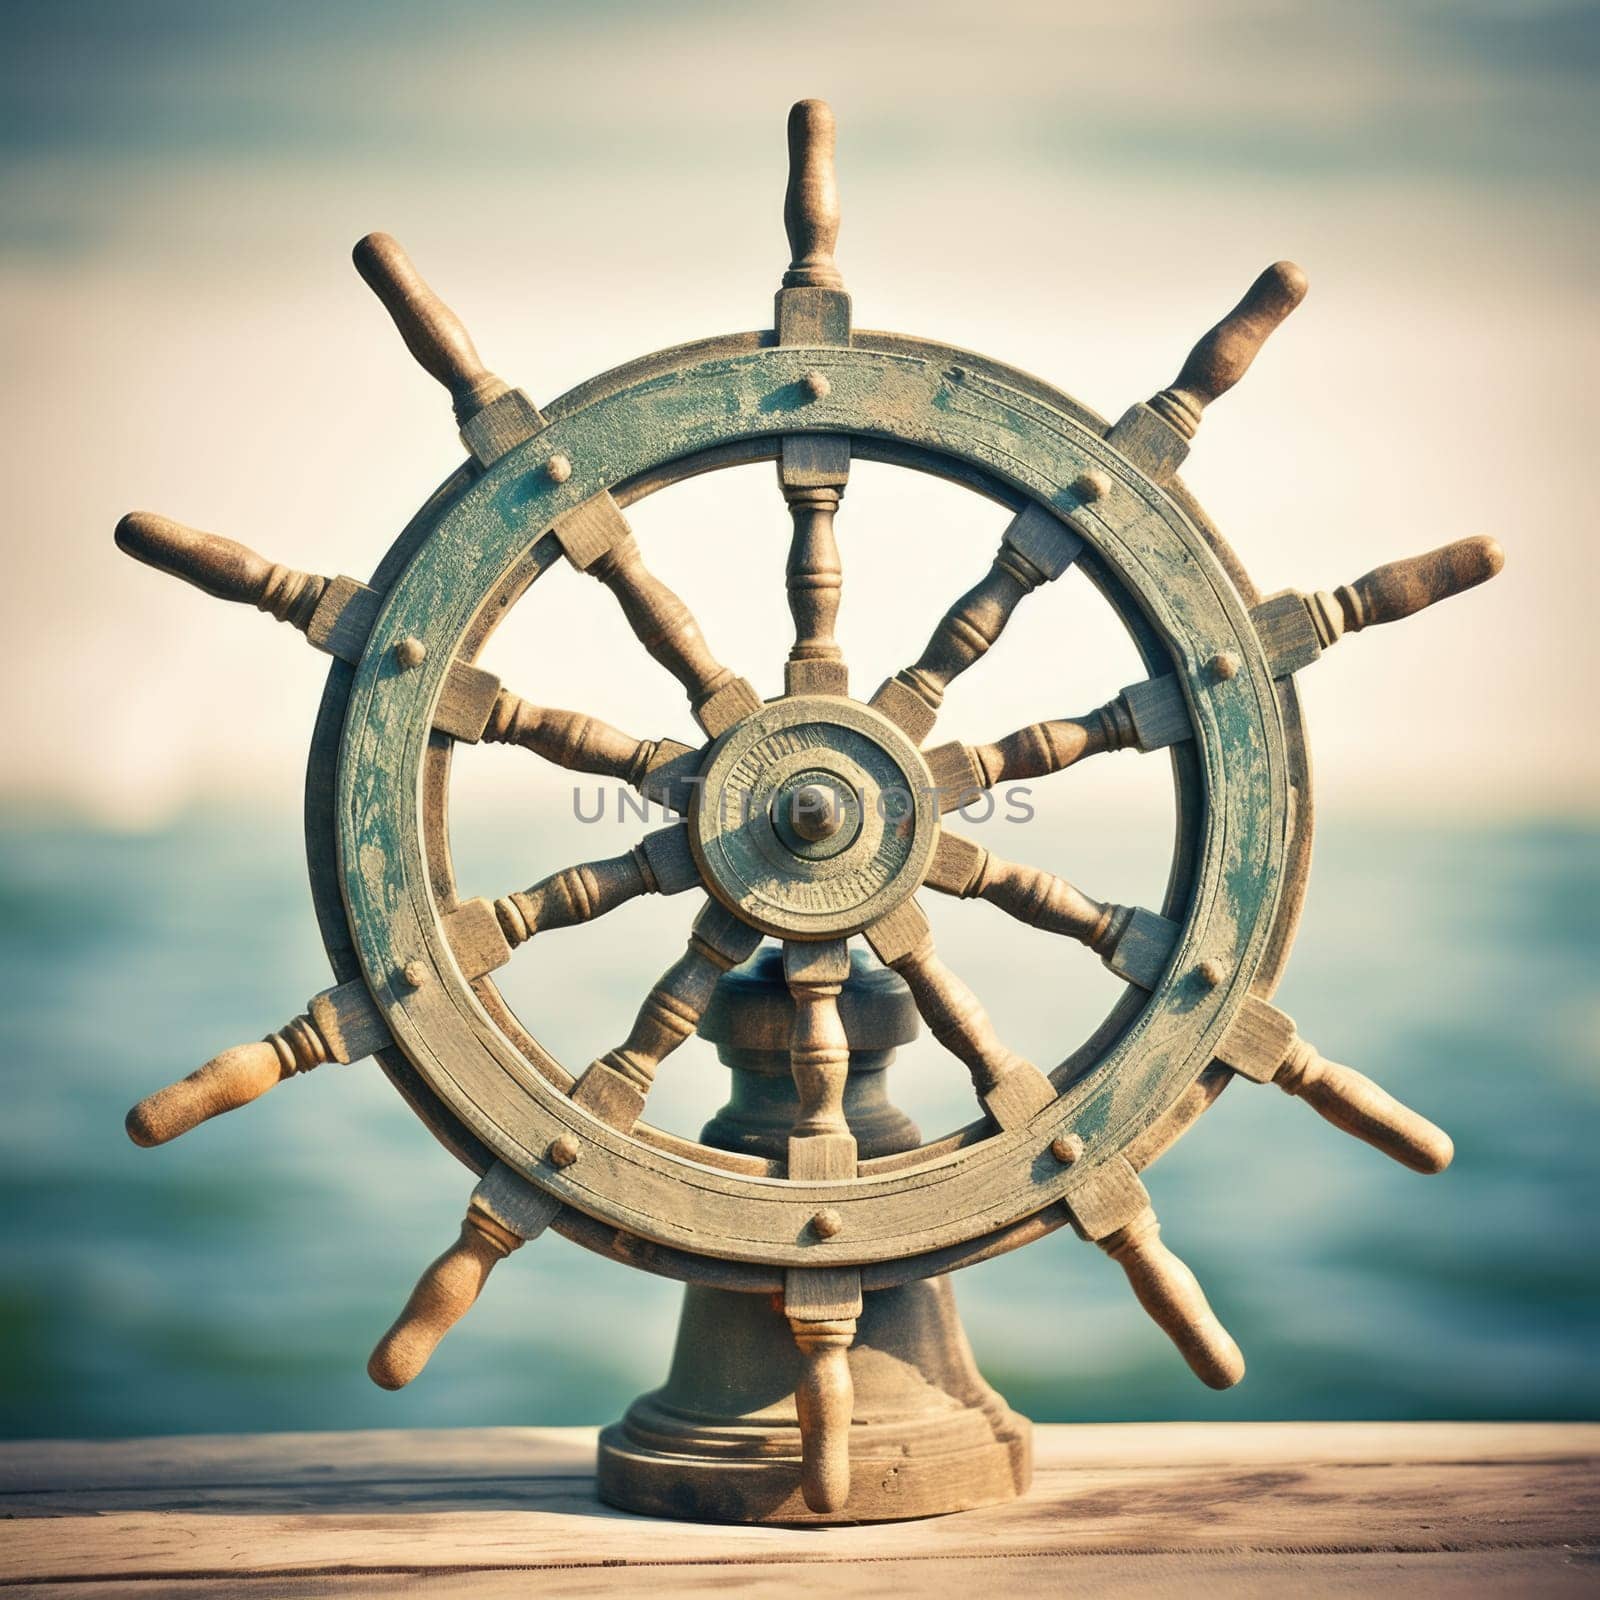 A ship wheel on a wooden table in front of the ocean